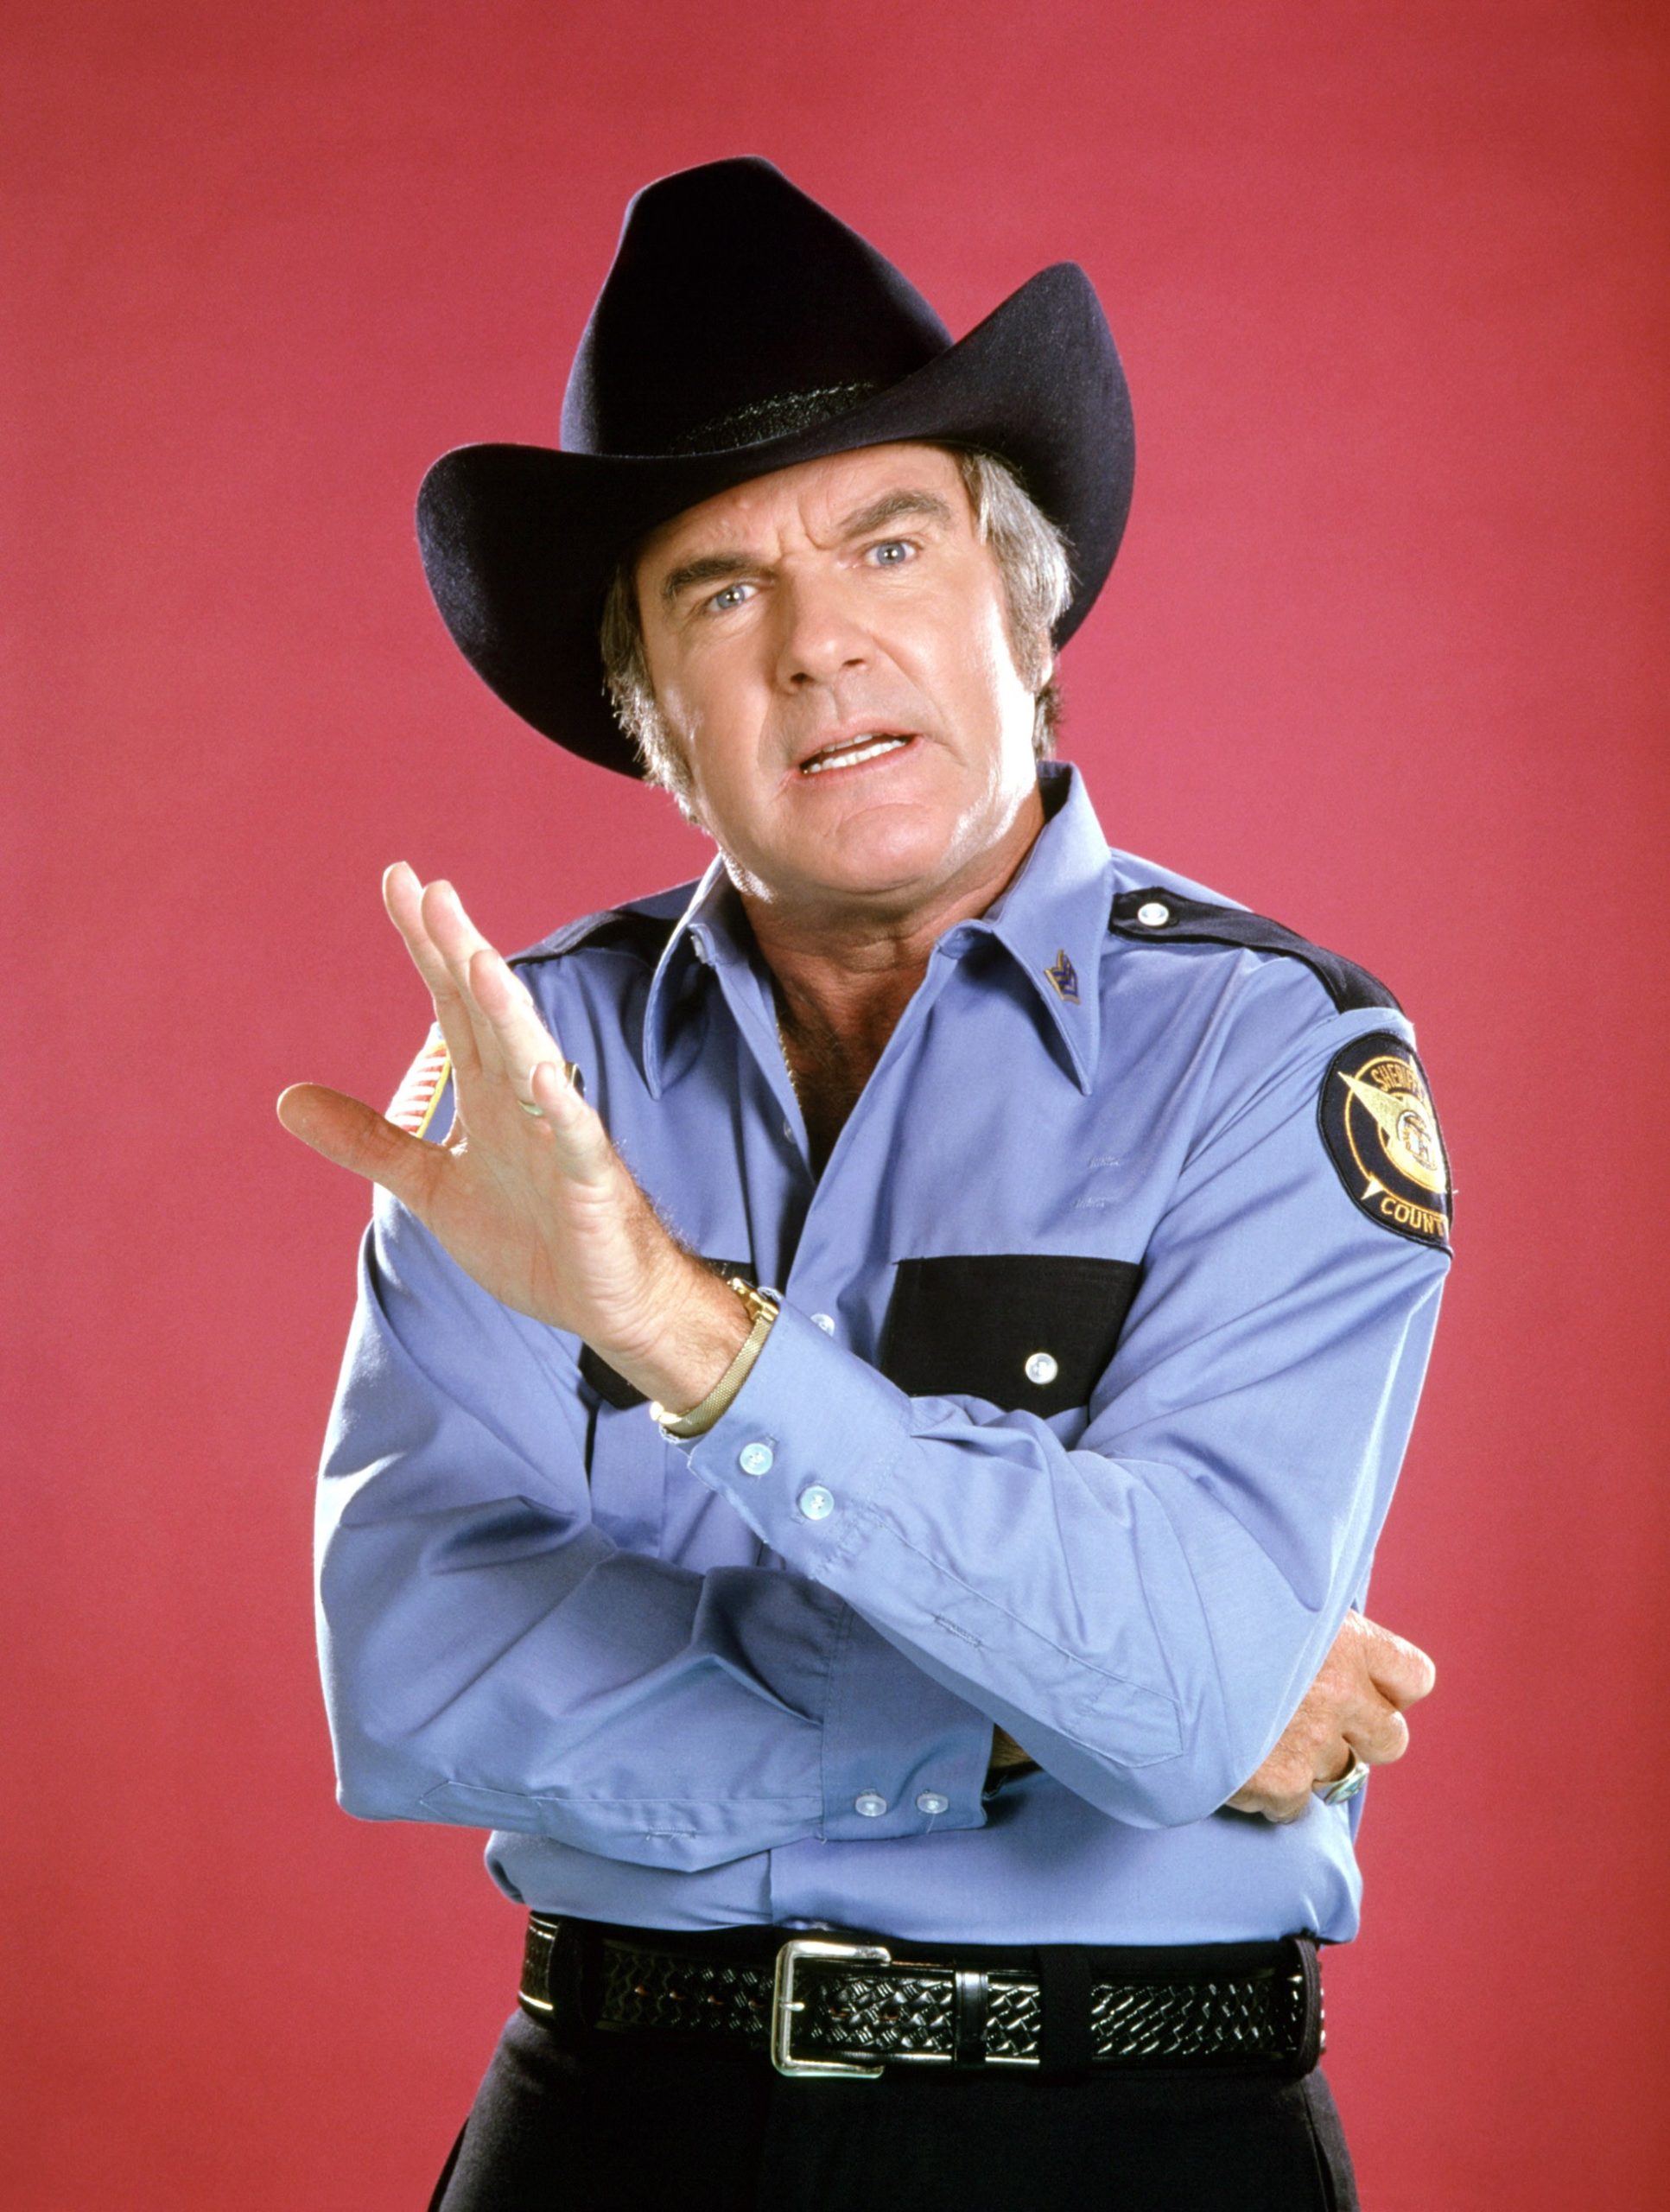 THE DUKES OF HAZZARD, James Best, 1979-85. © Warner Bros. Television / Courtesy: Everett Collection